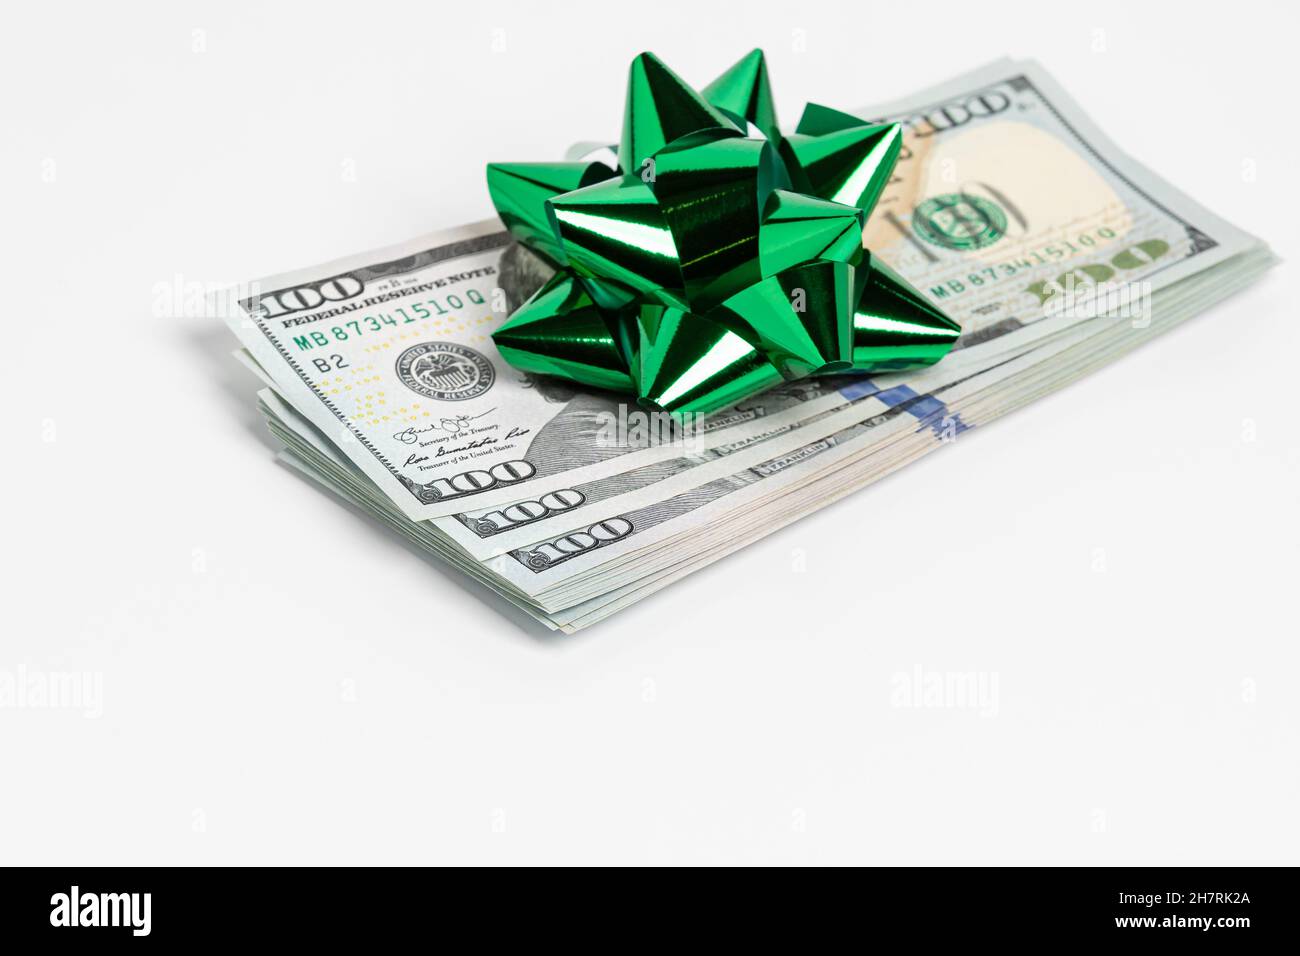 Cash gift of 100 dollar bills with green bow. Gift tax, charitable donation and holiday present concept. Stock Photo